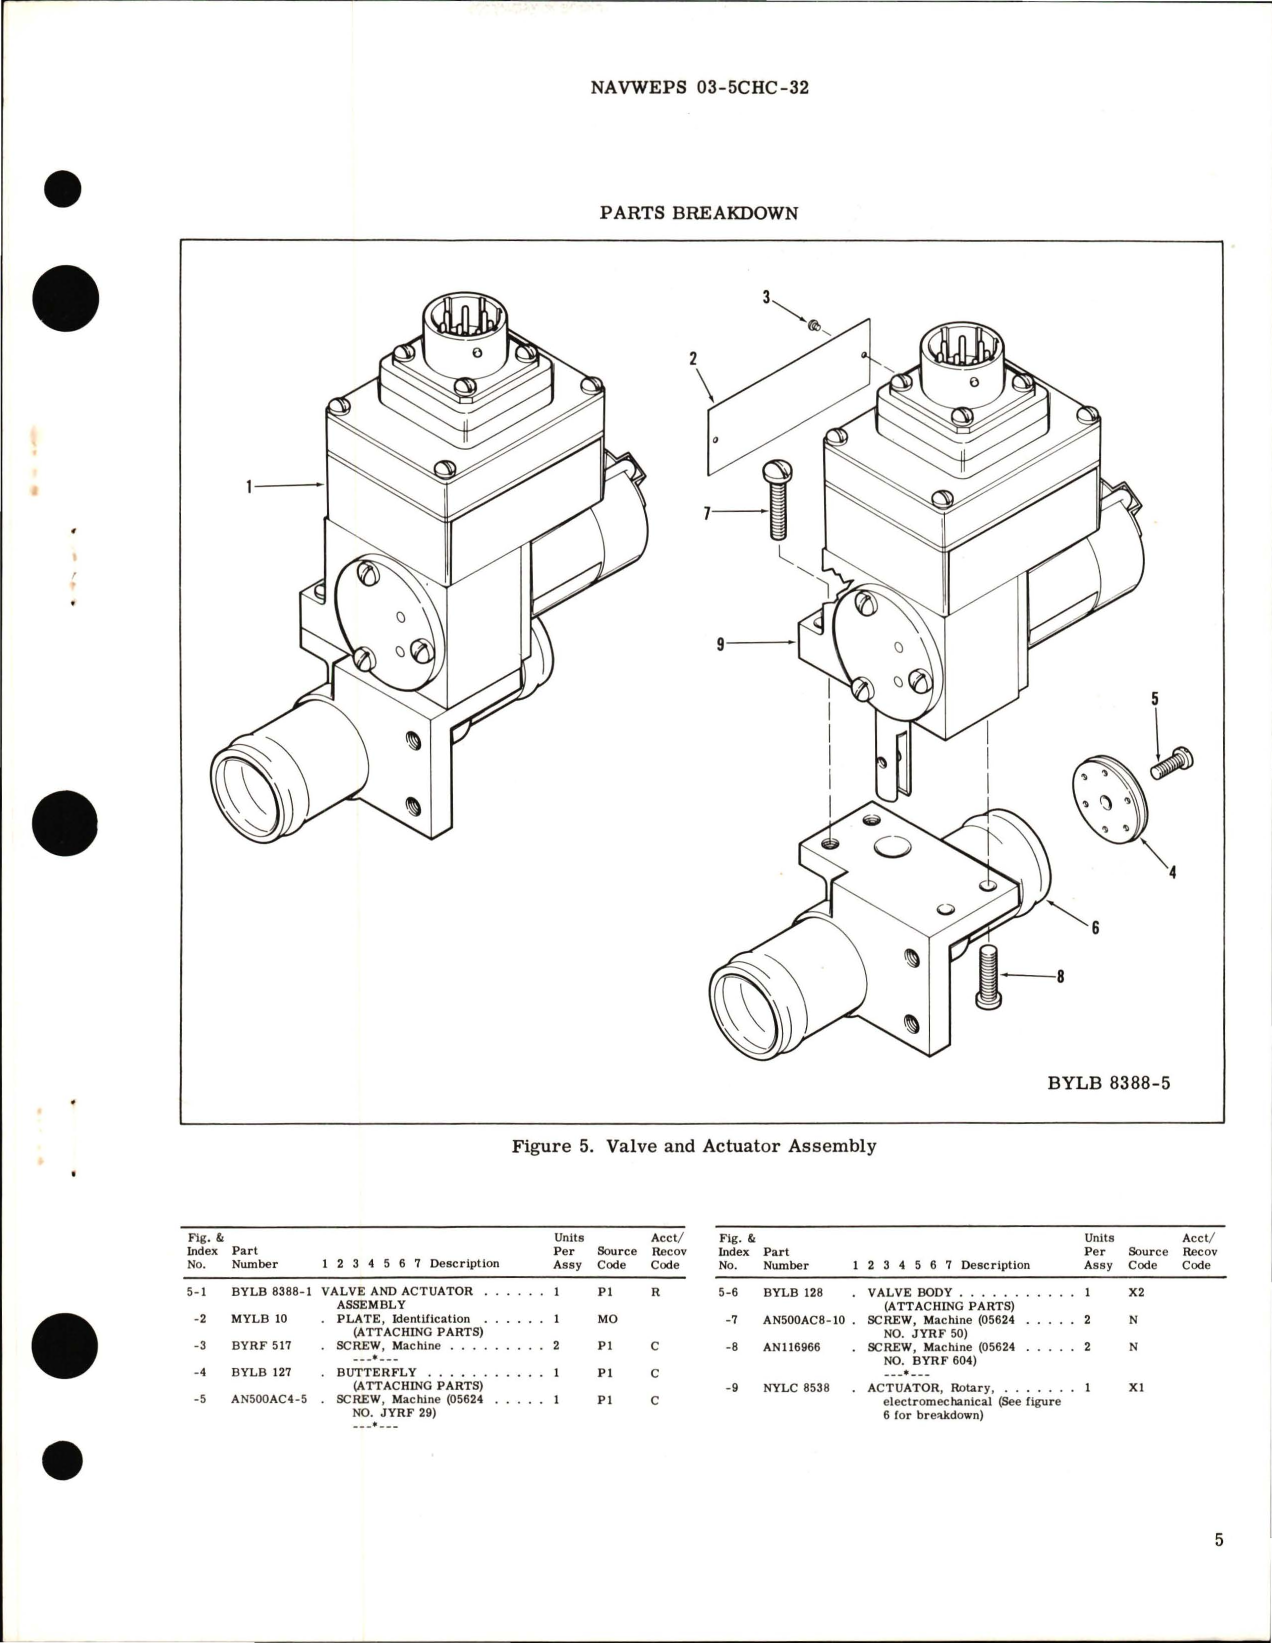 Sample page 5 from AirCorps Library document: Overhaul Instructions with Parts Breakdown for Valve and Actuator Assembly - Part BYLB 8388-1 